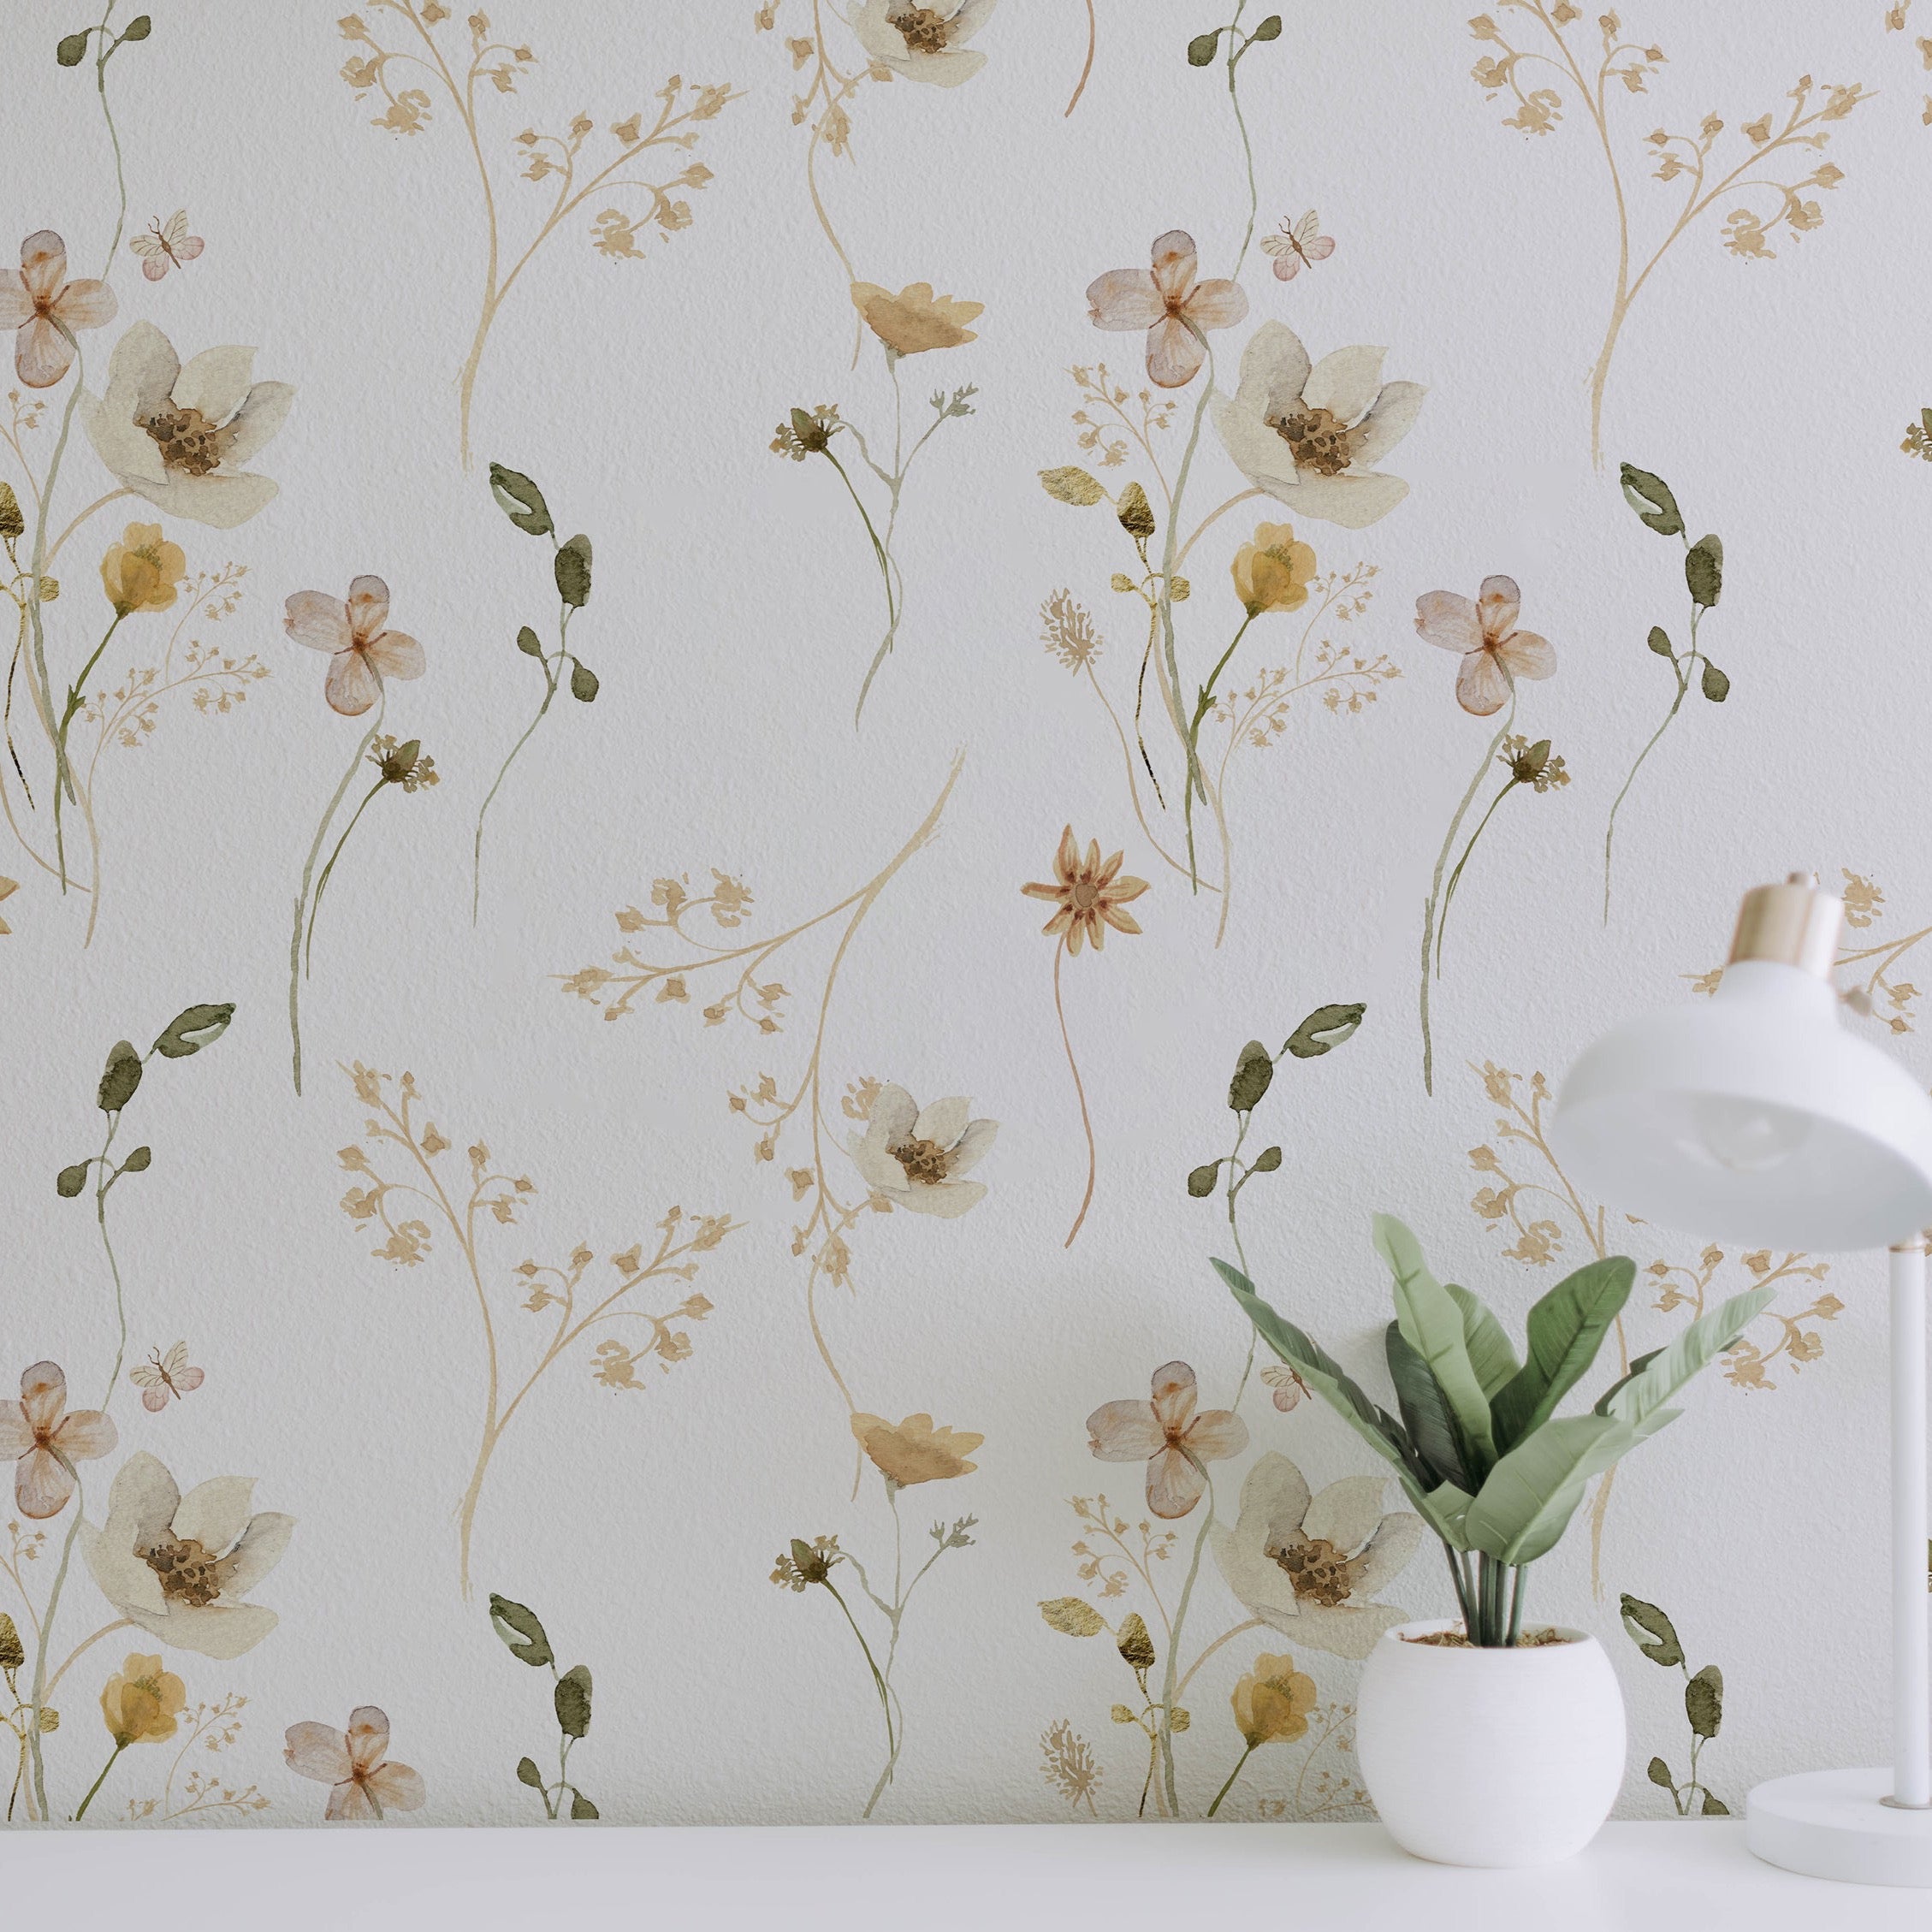 A modern home office corner is accented with the Delicate Floral Wallpaper II. The wallpaper's subtle floral design adds a touch of nature's finesse, harmonizing with a chic desk lamp and a potted plant for a workspace that’s both stylish and soothing.